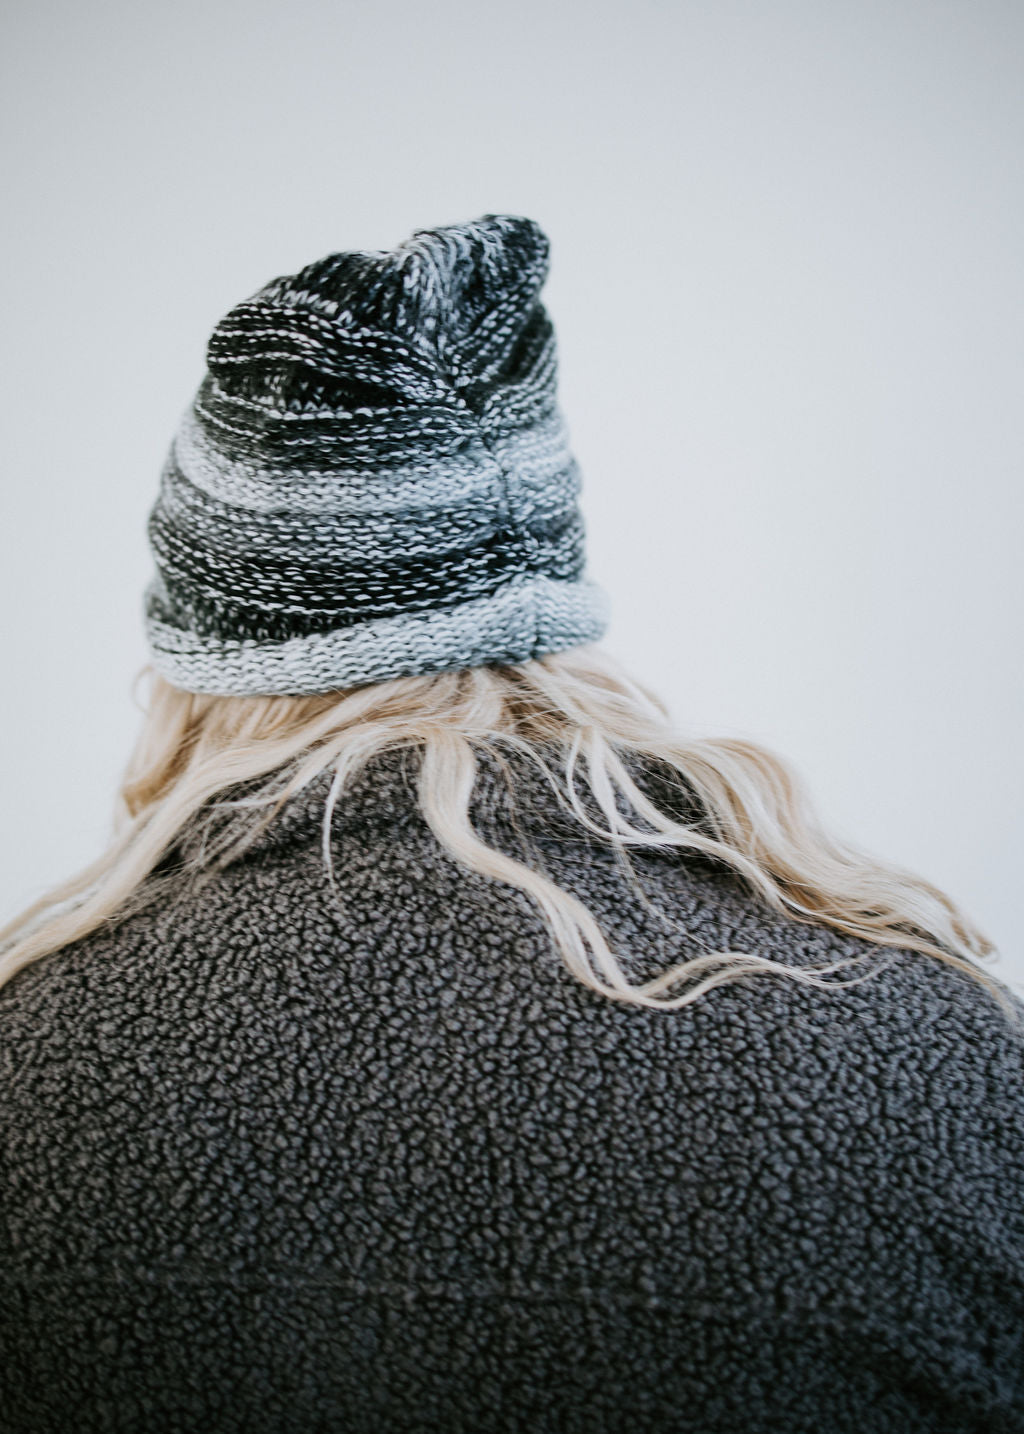 Philip Ruched Knitted Beanie FINAL SALE